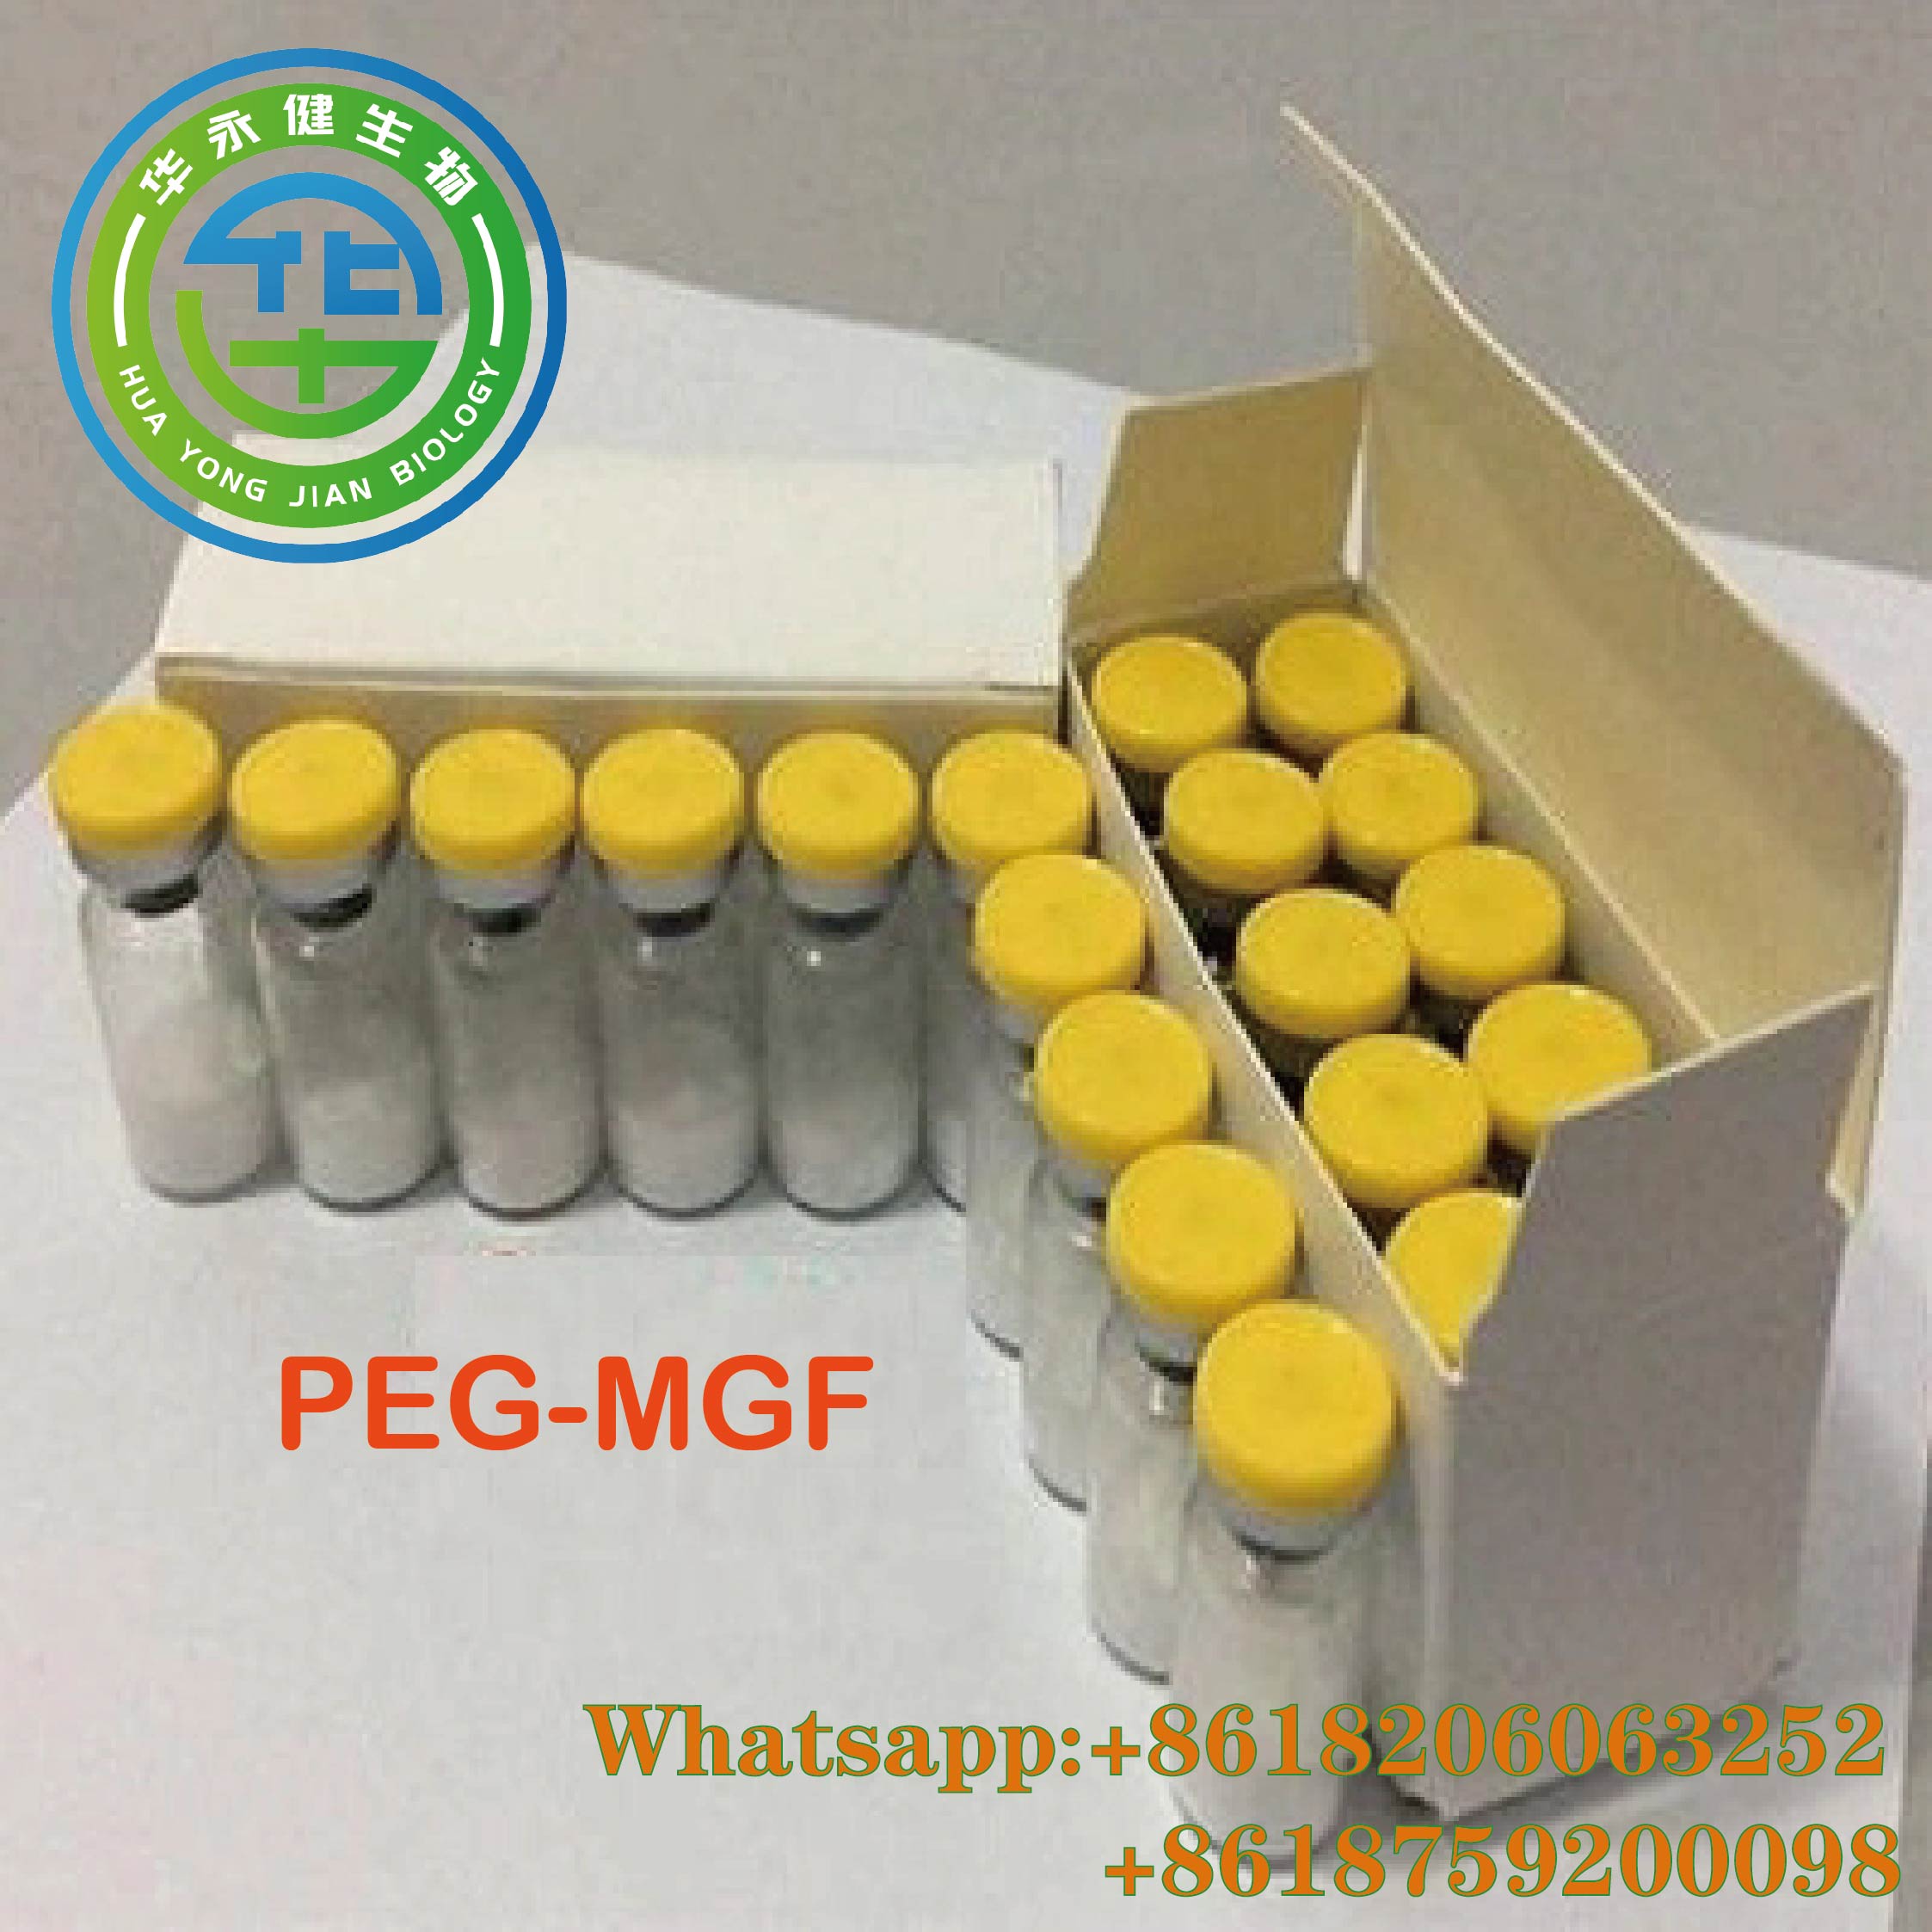 Wholesale 99.9% Injectable Peptide PEG-MGF Peptides CasNO.62031-54-3  Raw Powder Steroids Hormone